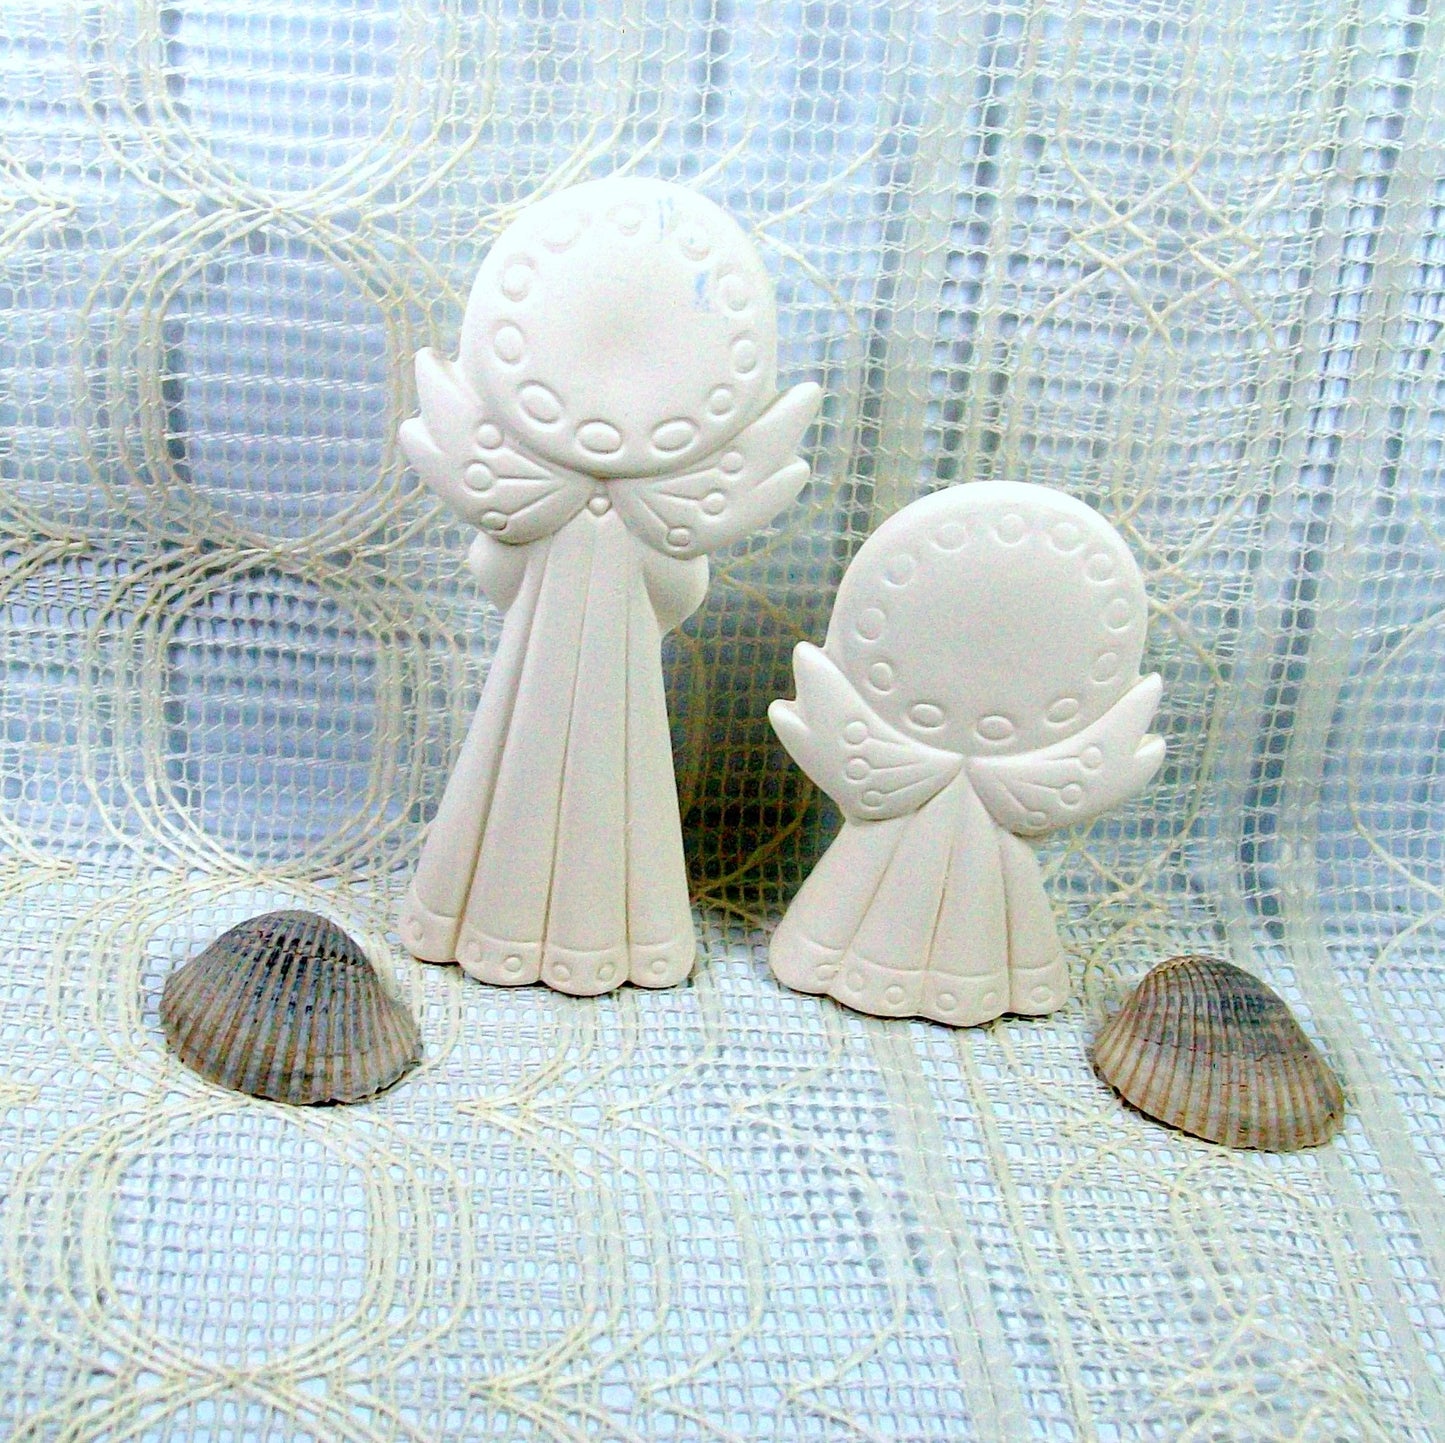 Unpainted Ceramic Angel Figurines / Bisque Angel Statues / Angel Decor / Angel Lover Gift / Ceramics to Paint / Ready to Paint / Paintable